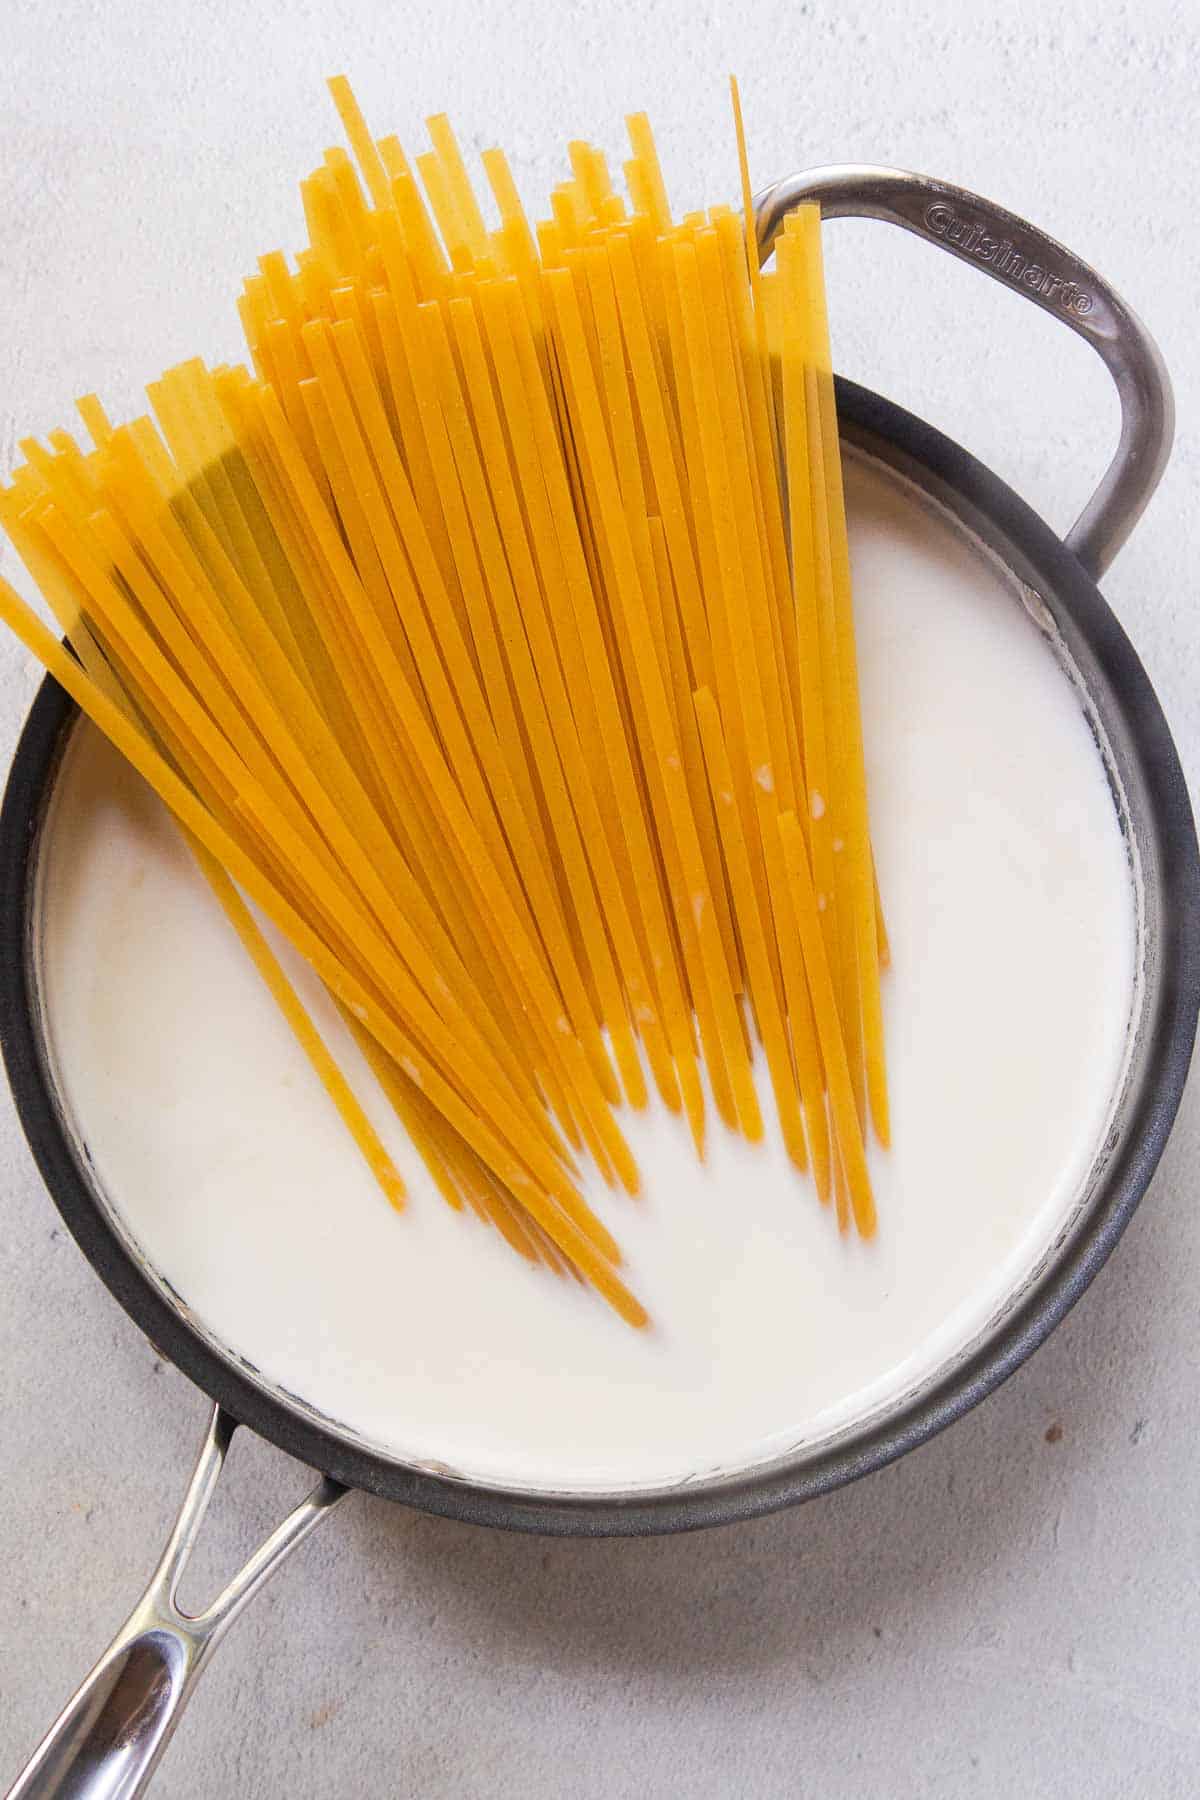 Uncooked fettuccine pasta is added to the boiling milk and broth mixture